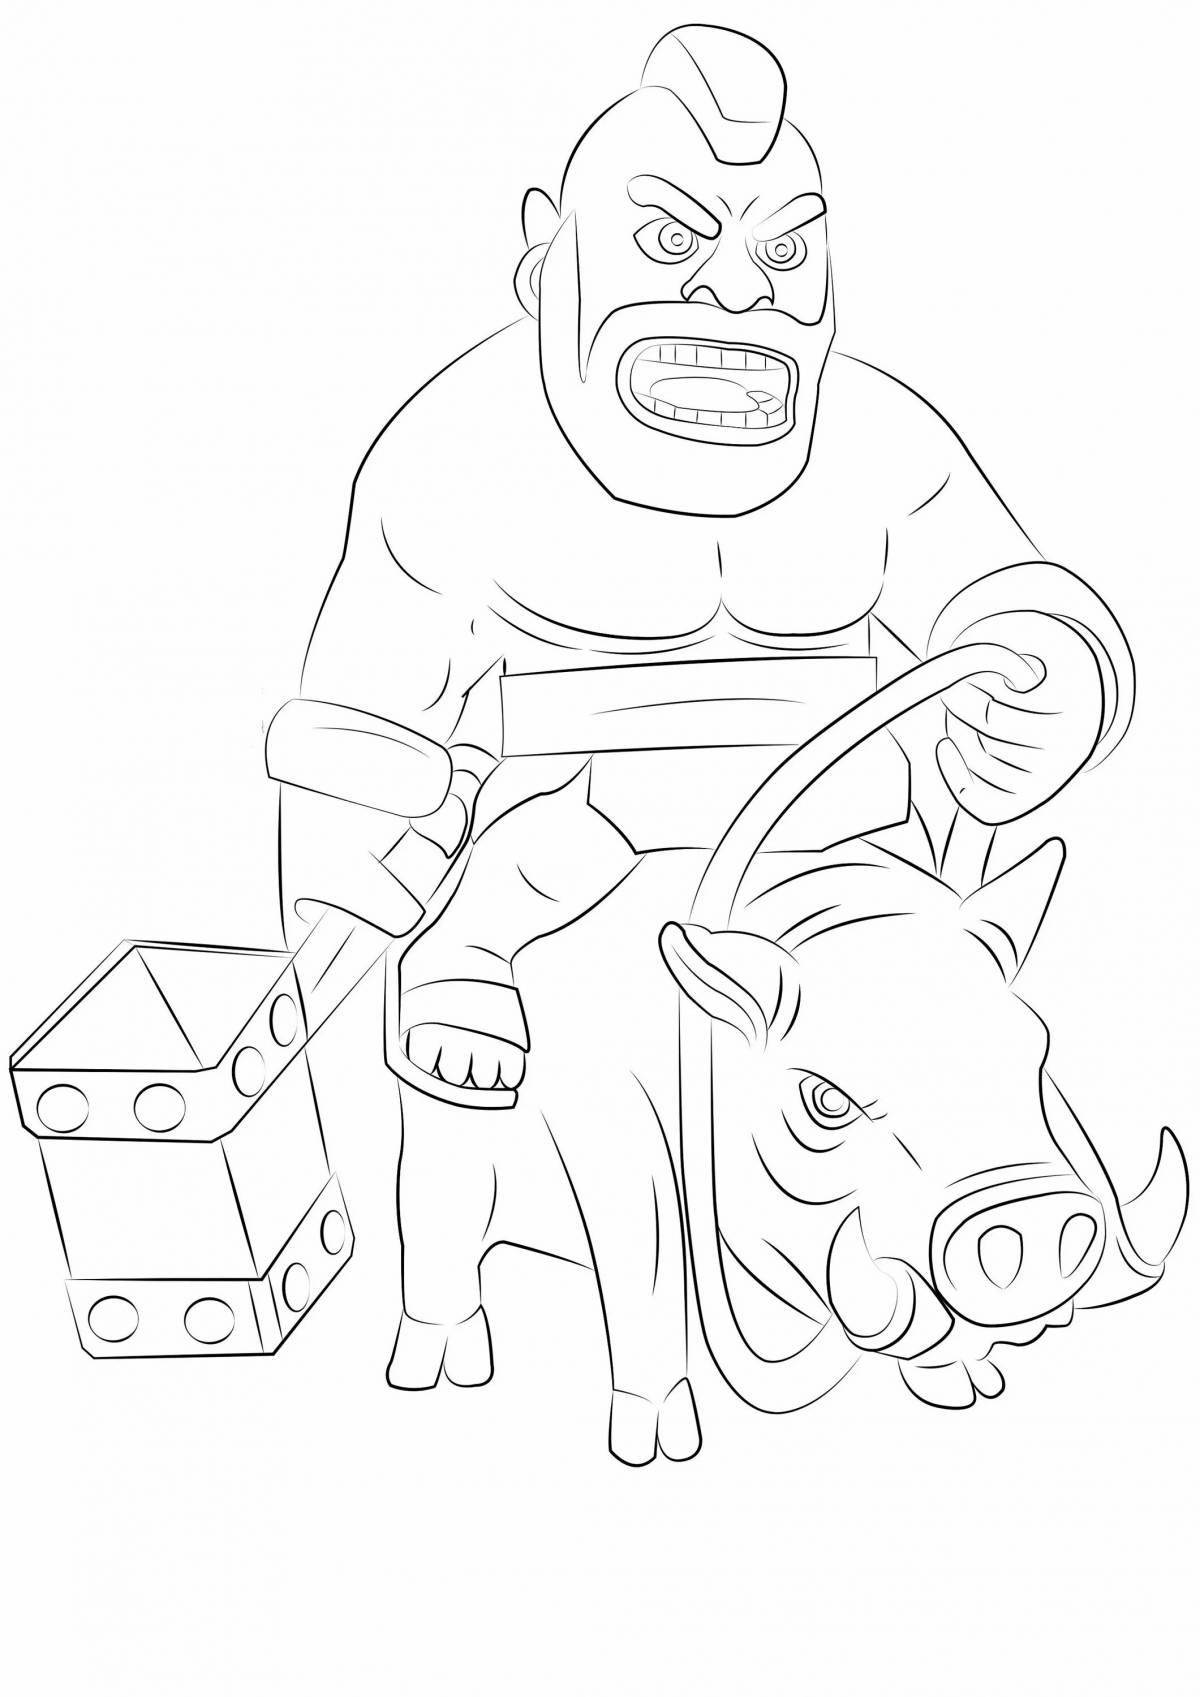 Clash royale arena magic coloring page